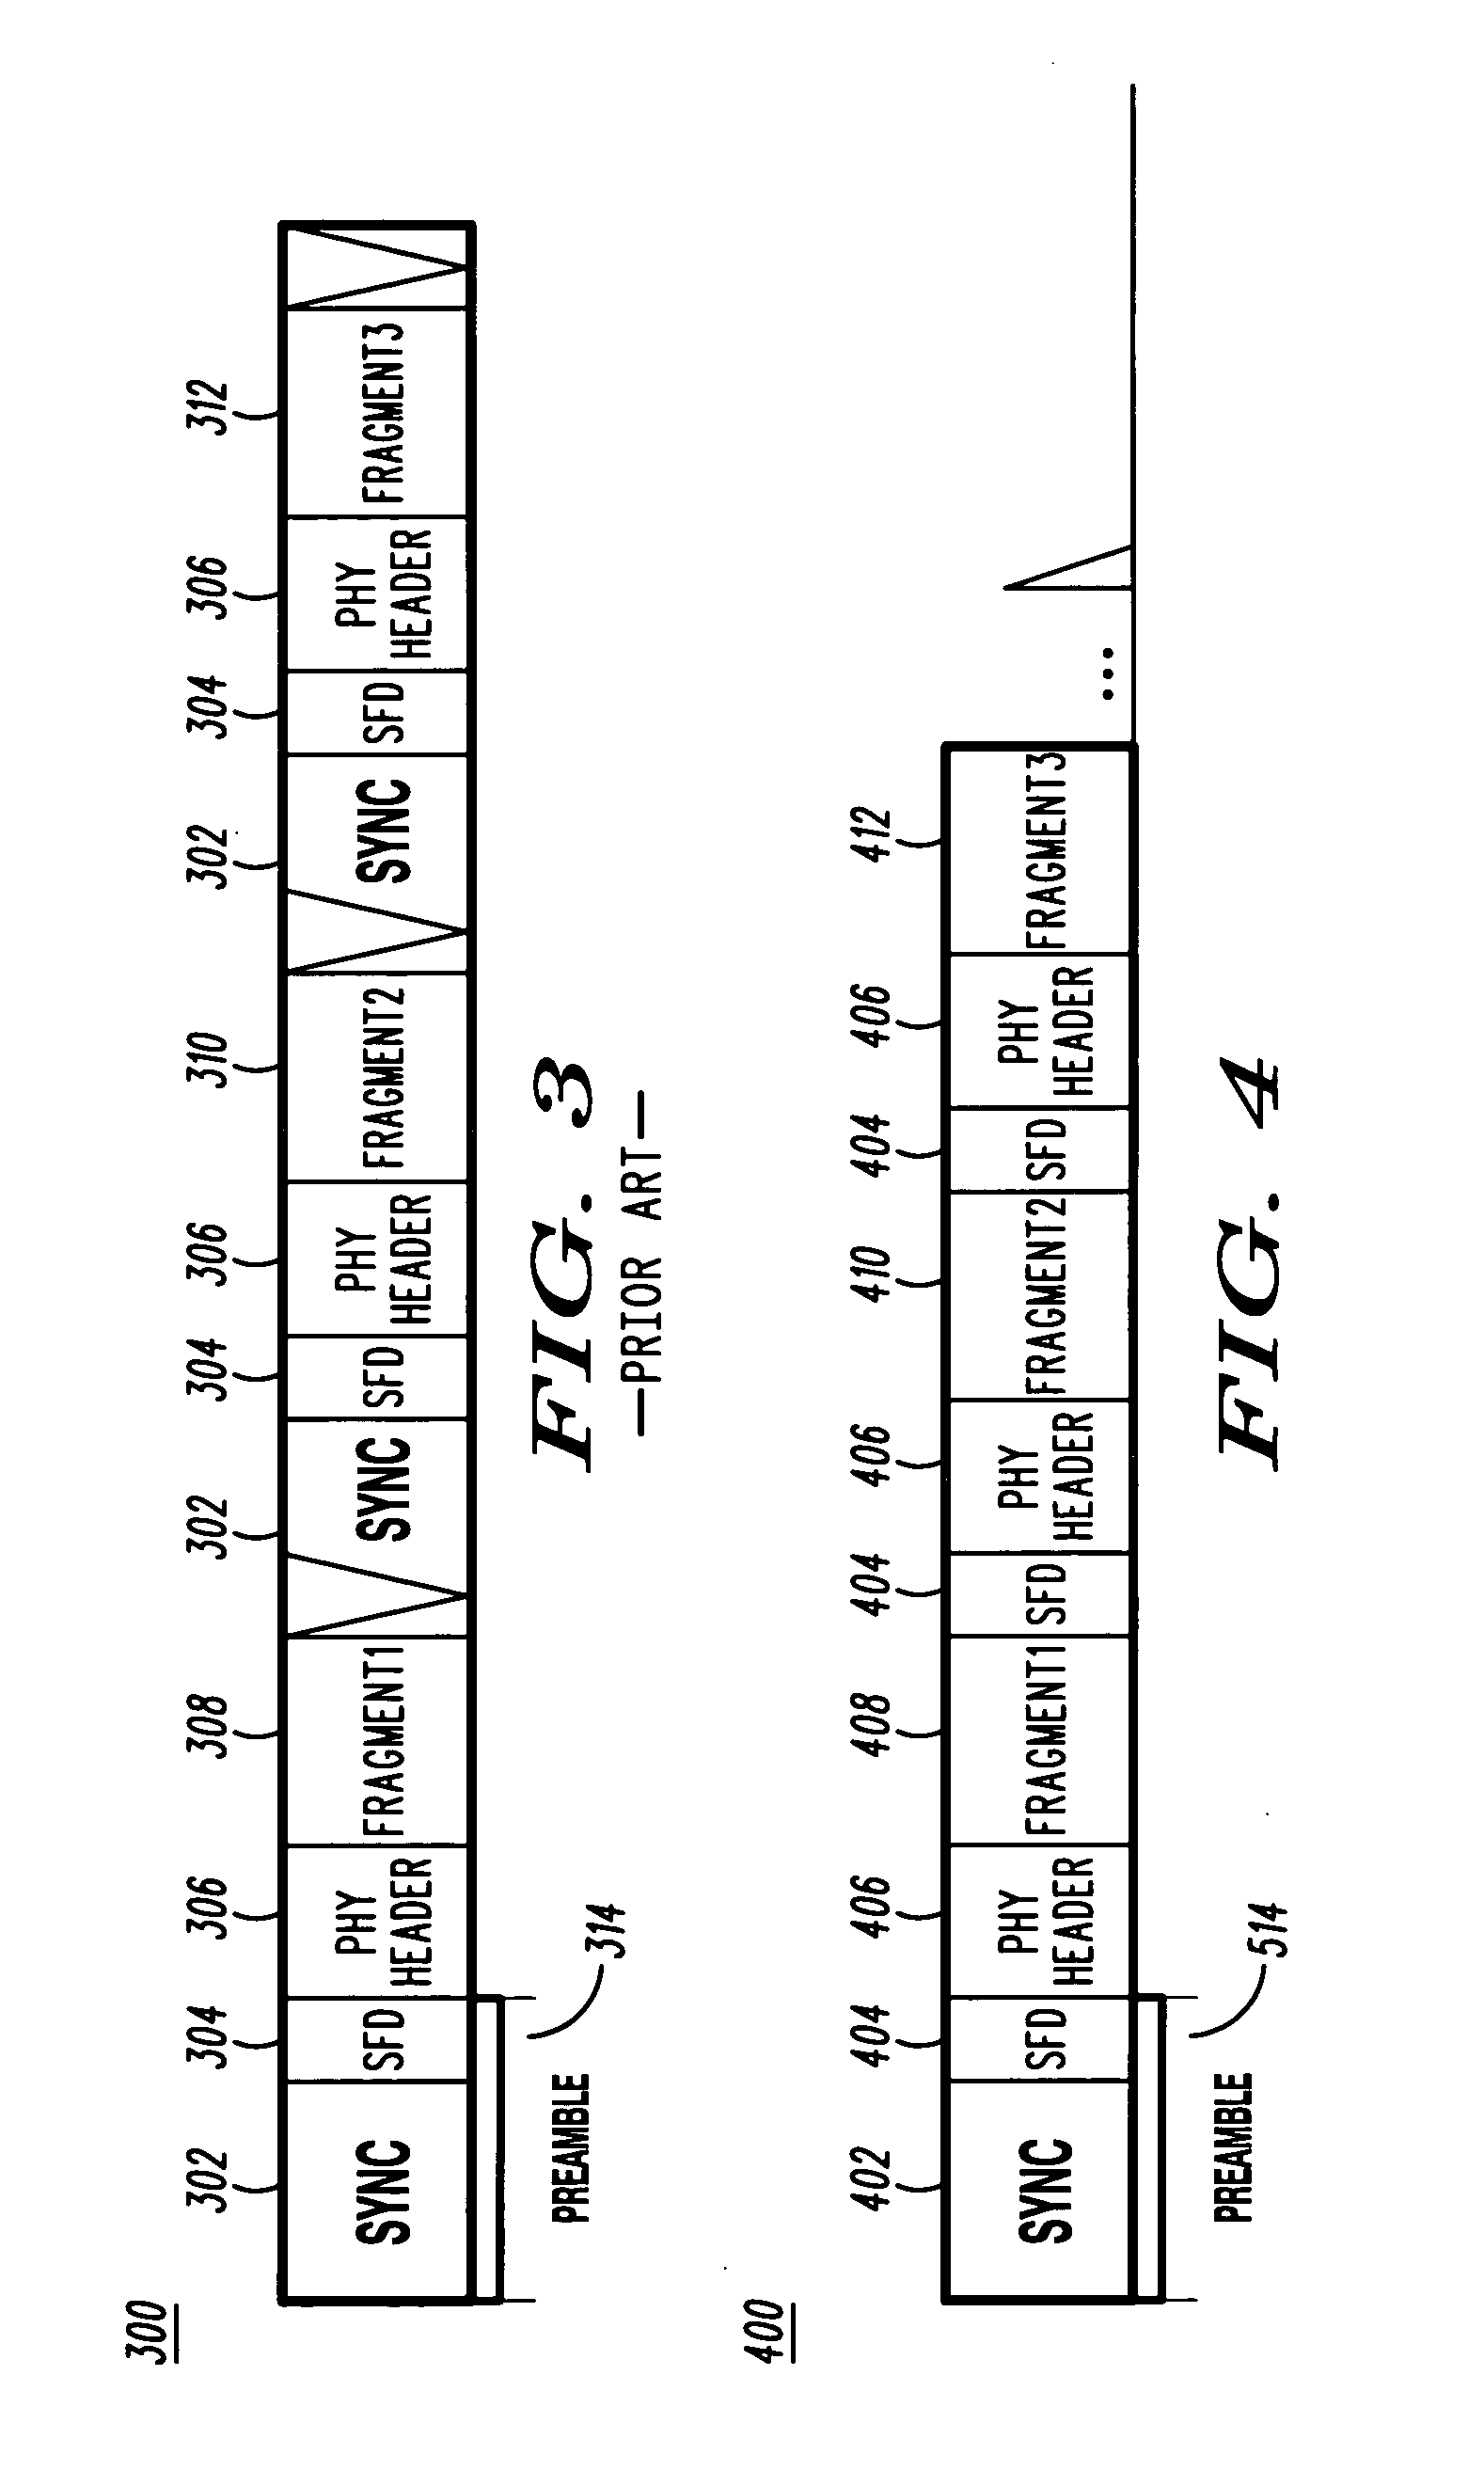 Method and apparatus for improving throughput in a wireless local area network